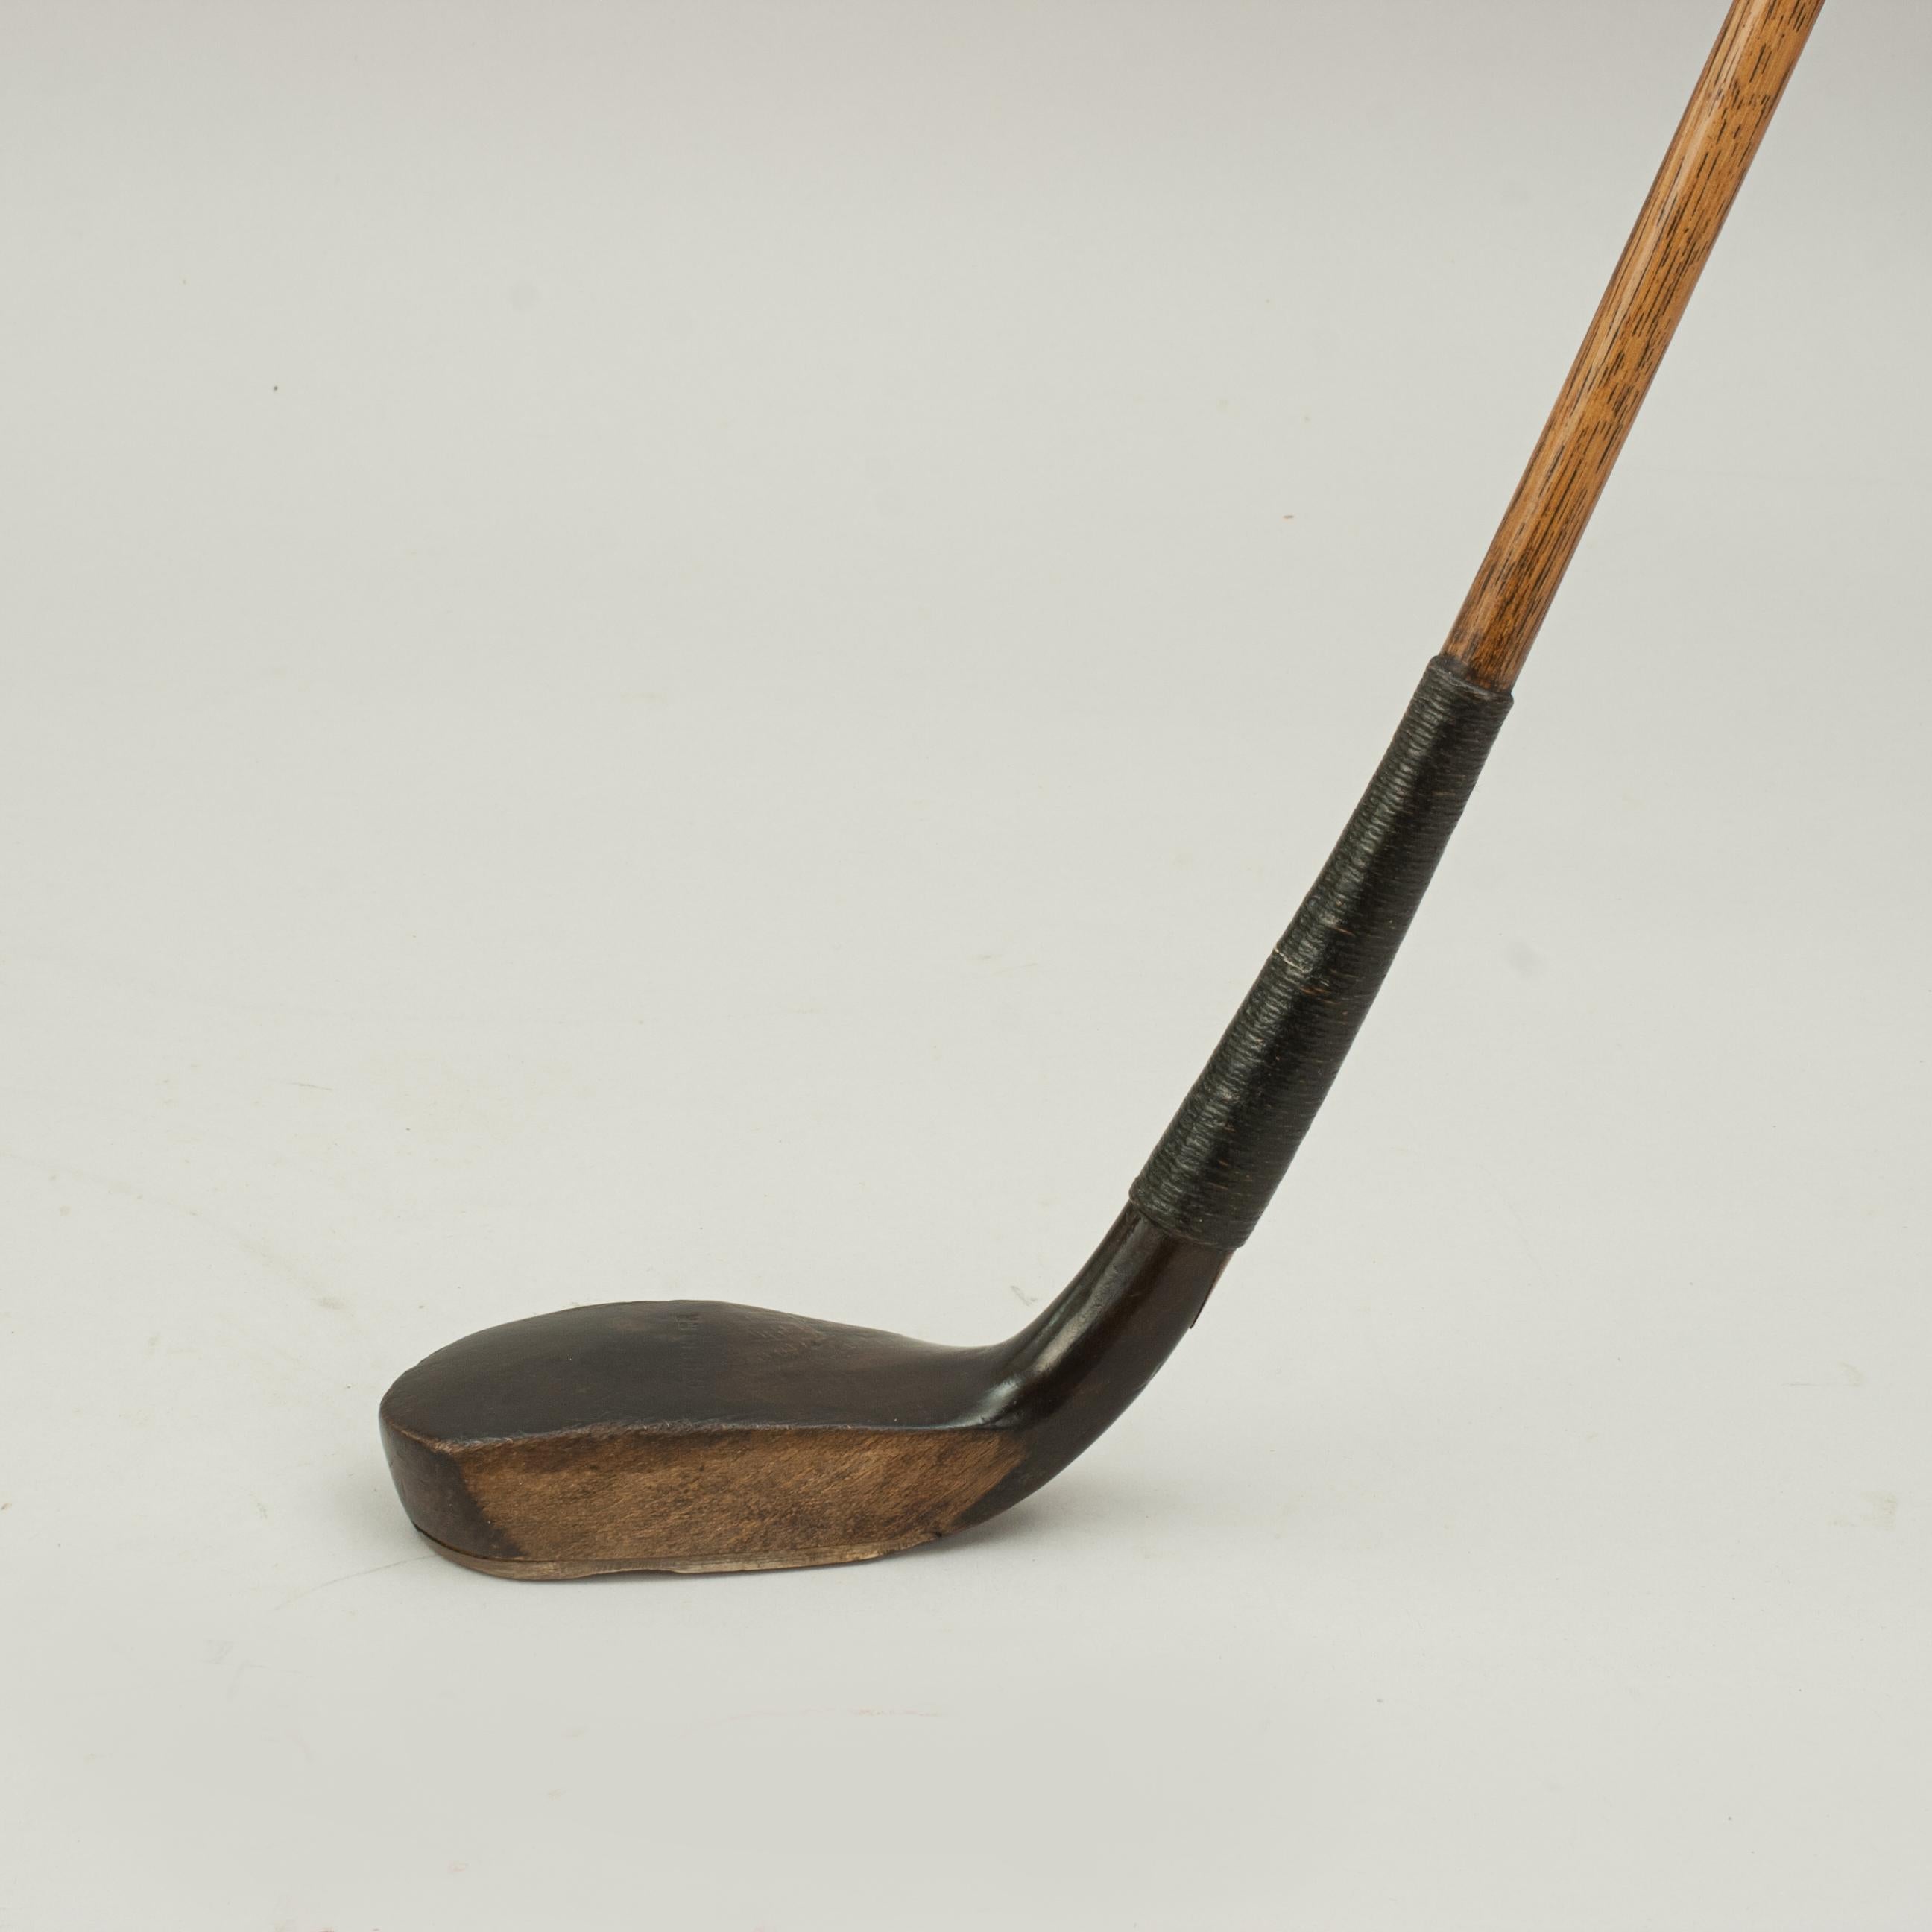 Antique scared head putter, Charlie Hunter.
A good long nose style putter by Charlie Hunter, Prestwick. The golf club has a lead weight to the rear, traditional horn slip along the leading edge of the sole, the stained polished beech wood head